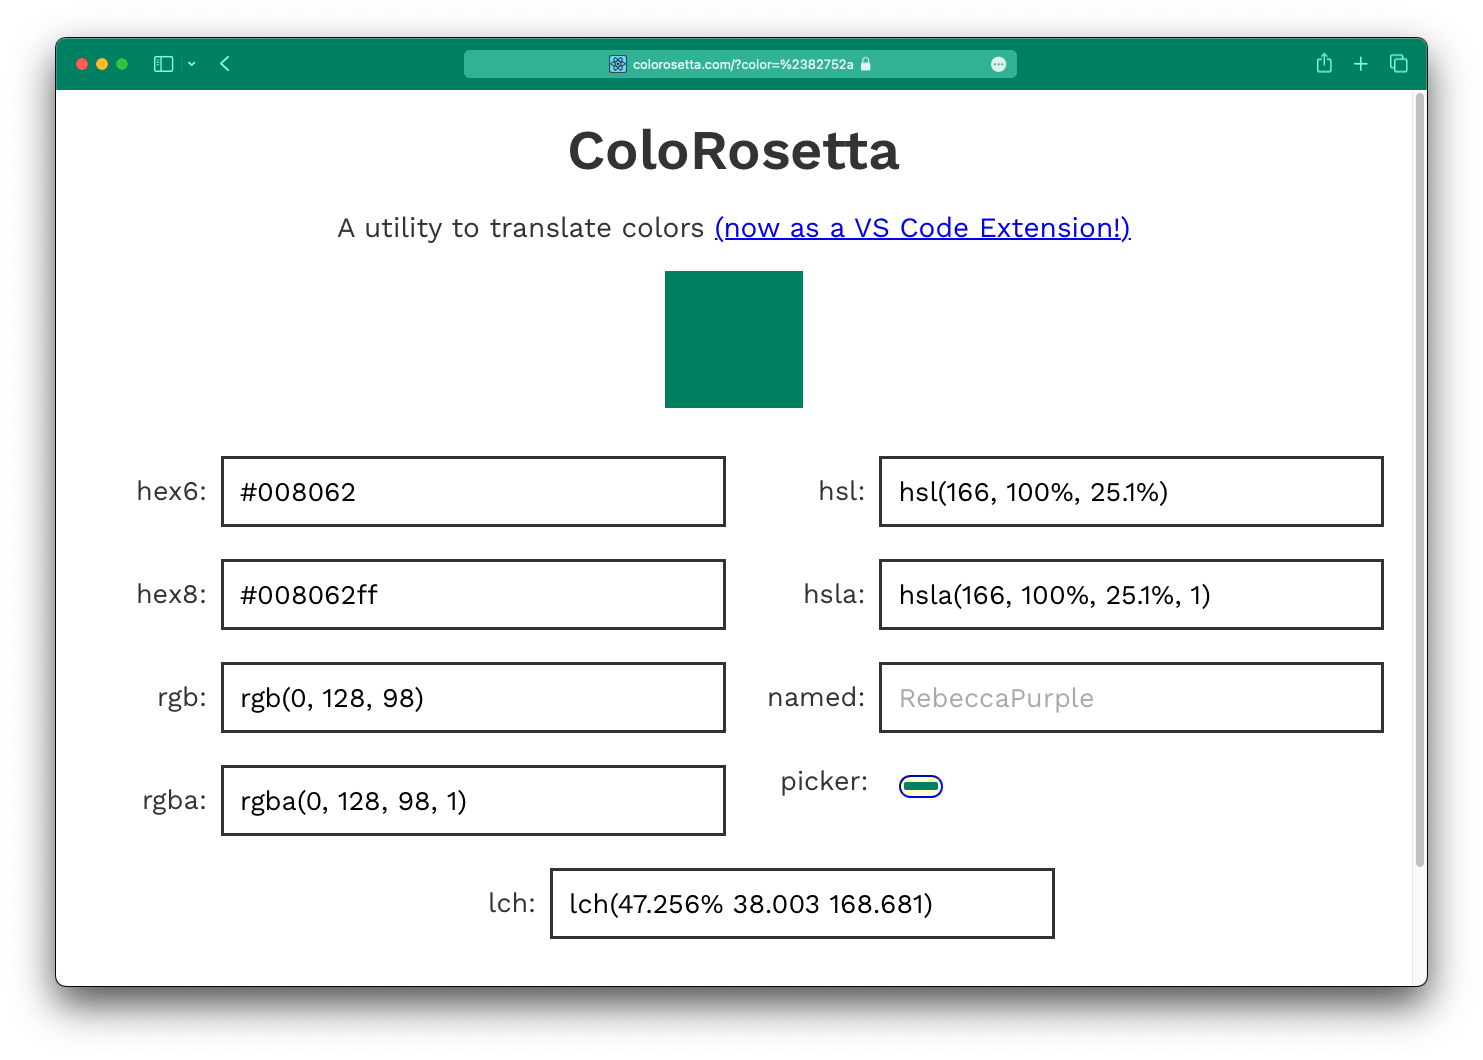 The browser chrome updated to green in Safari with ColoRosetta